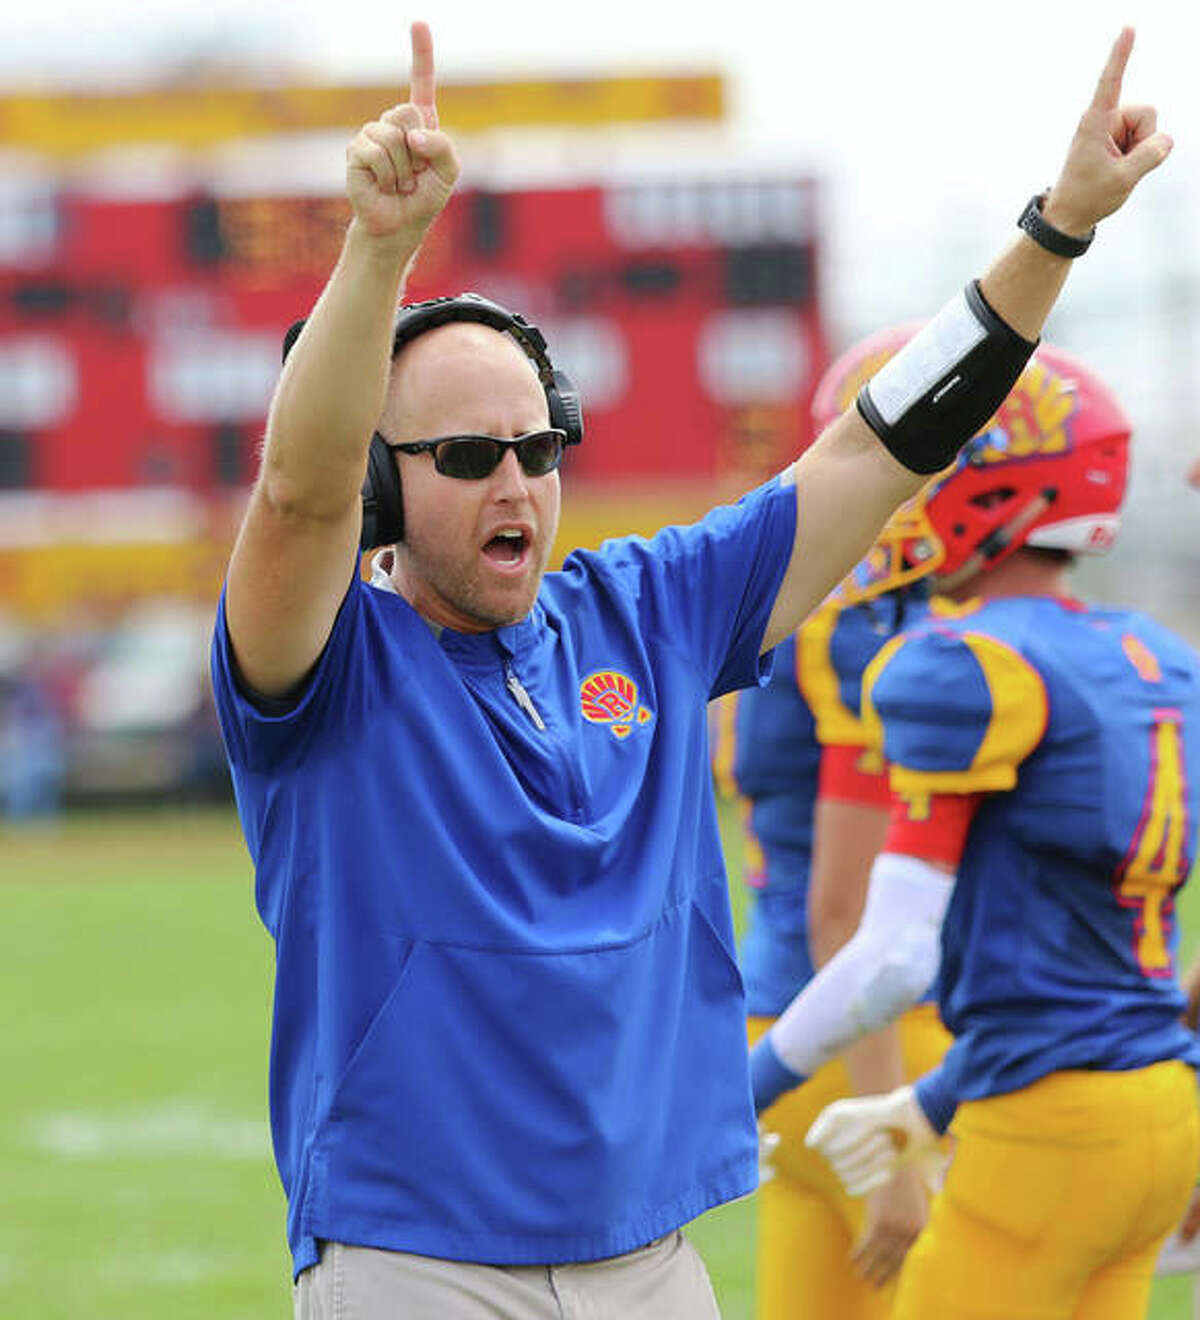 Roxana coach Wade DeVries signals for the PAT unit after a Shells touchdown in last season’s opener at Raich Field in Roxana. DeVries, in his second year at Roxana, is the 2019 Telegraph Small-Schools Football Coach of the Year.